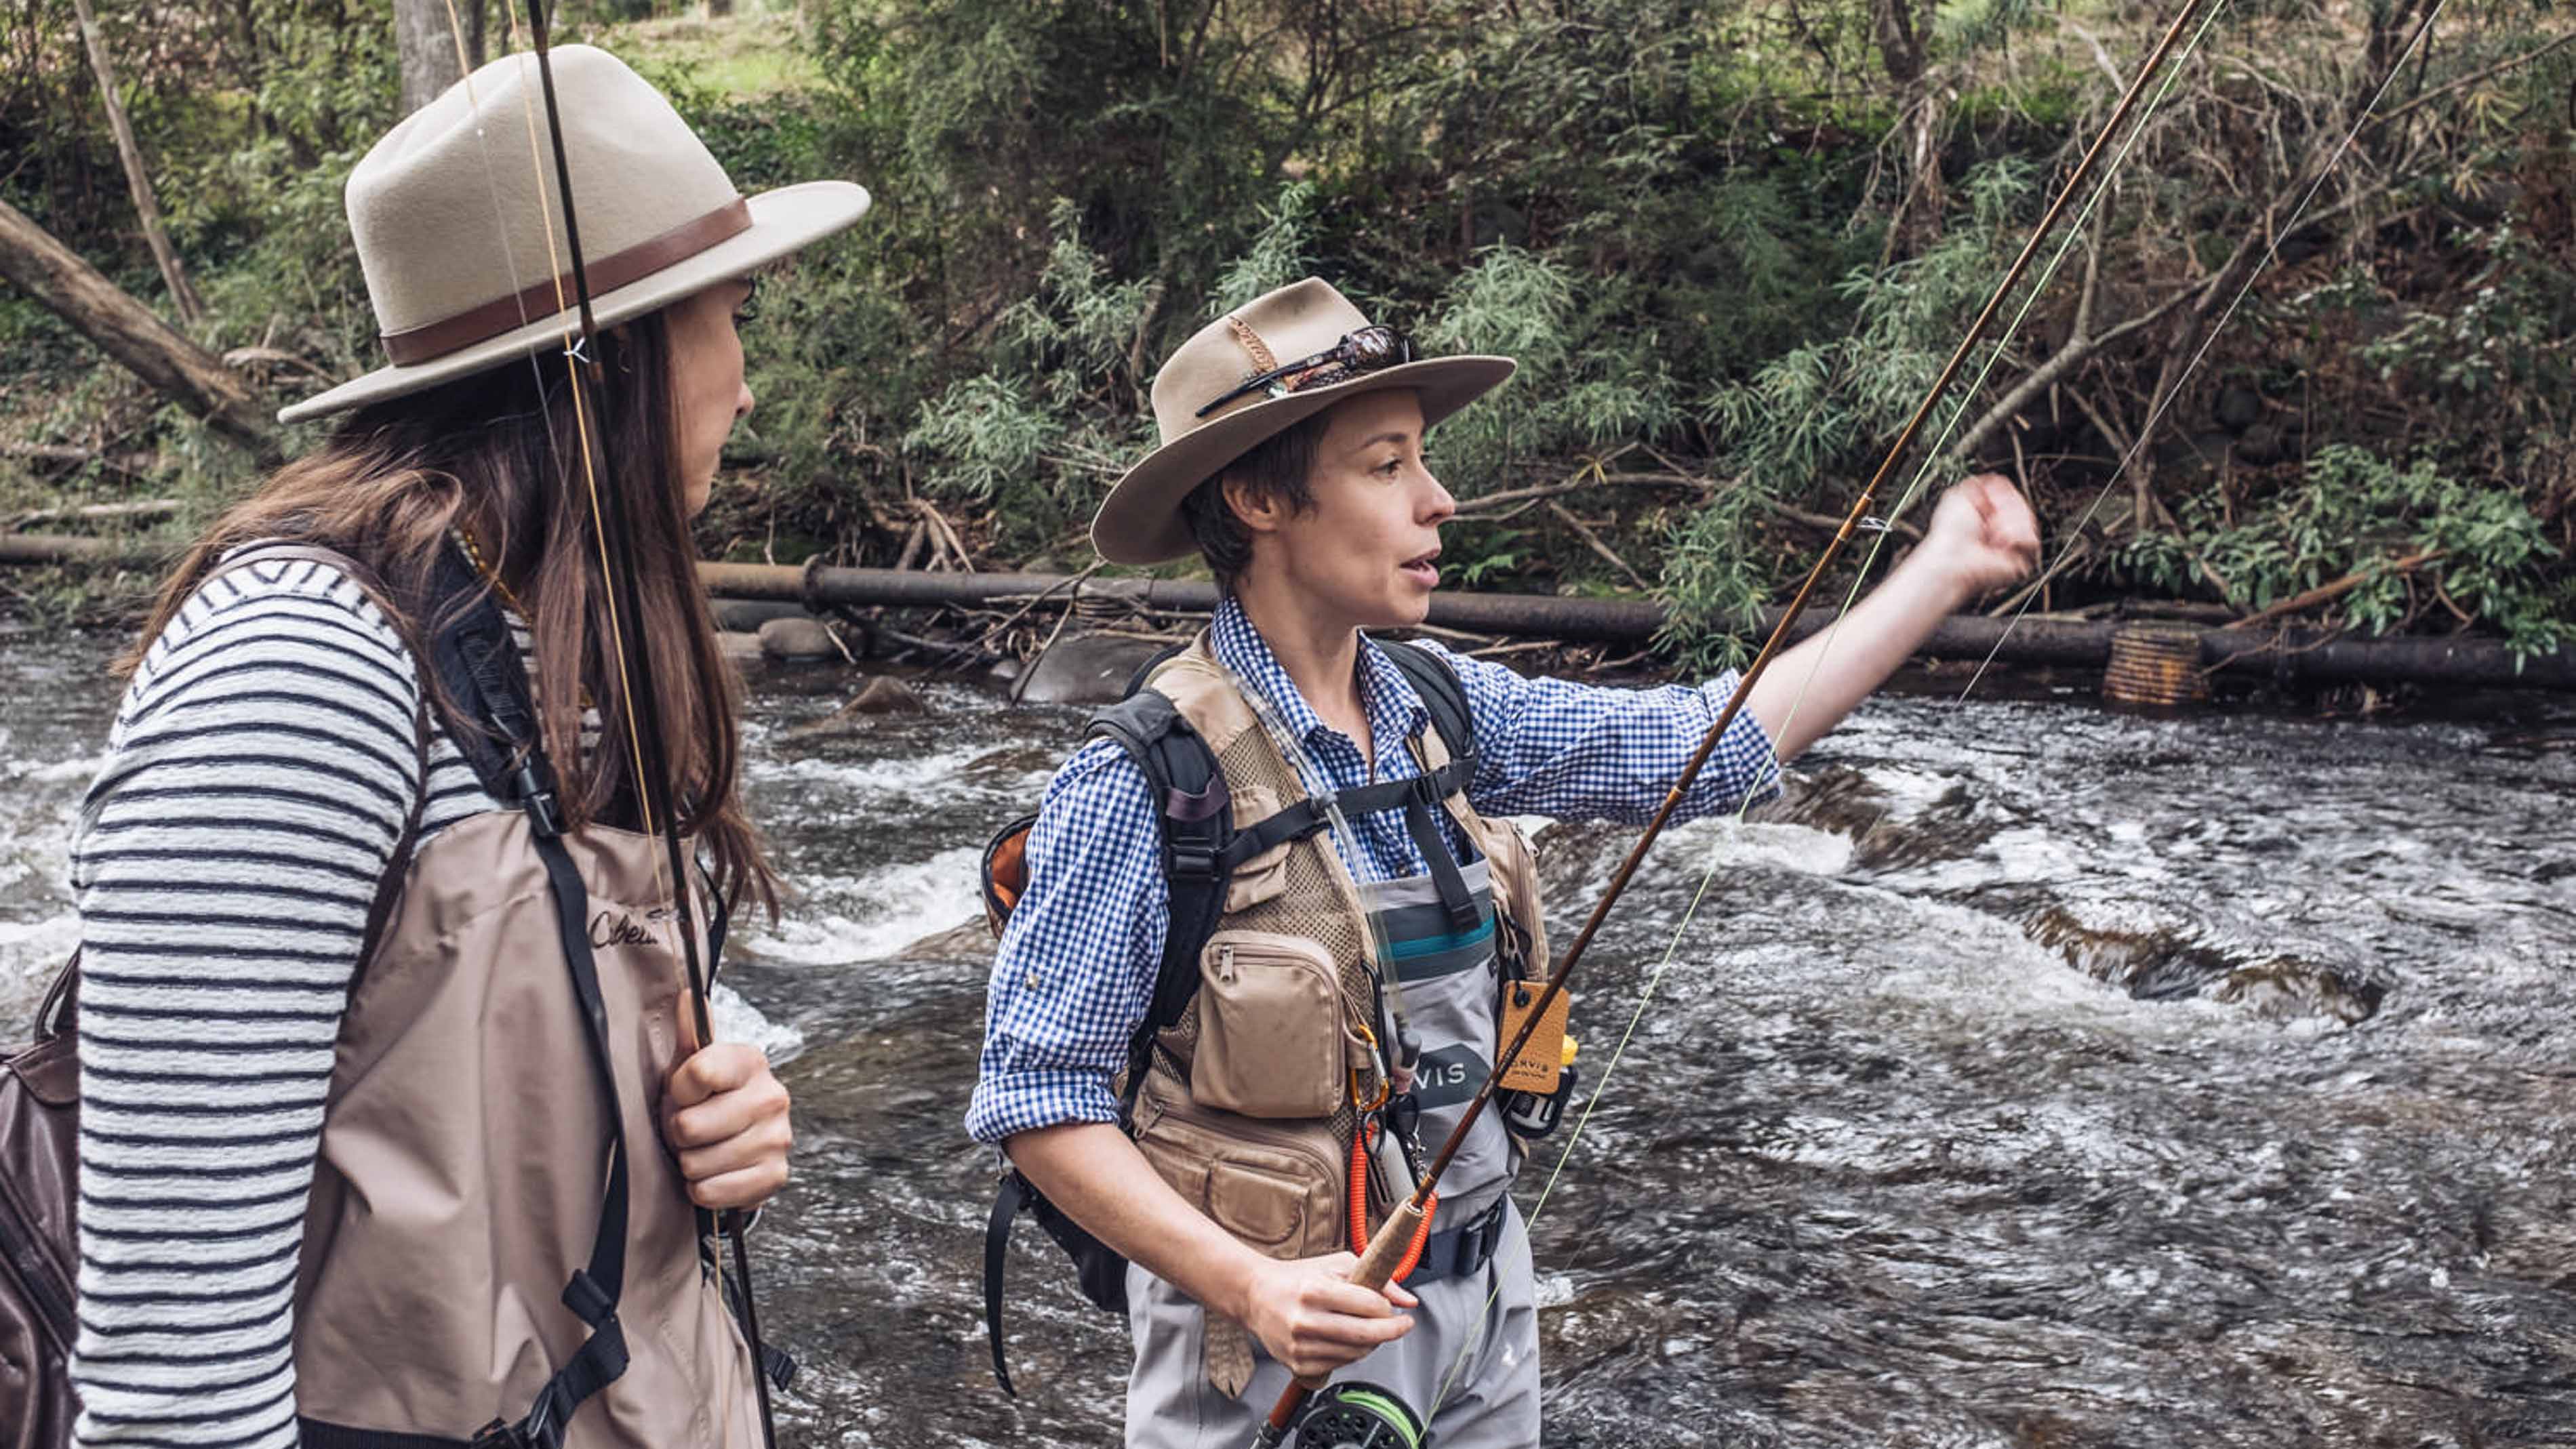 The fly fisher who wants more women out on the water